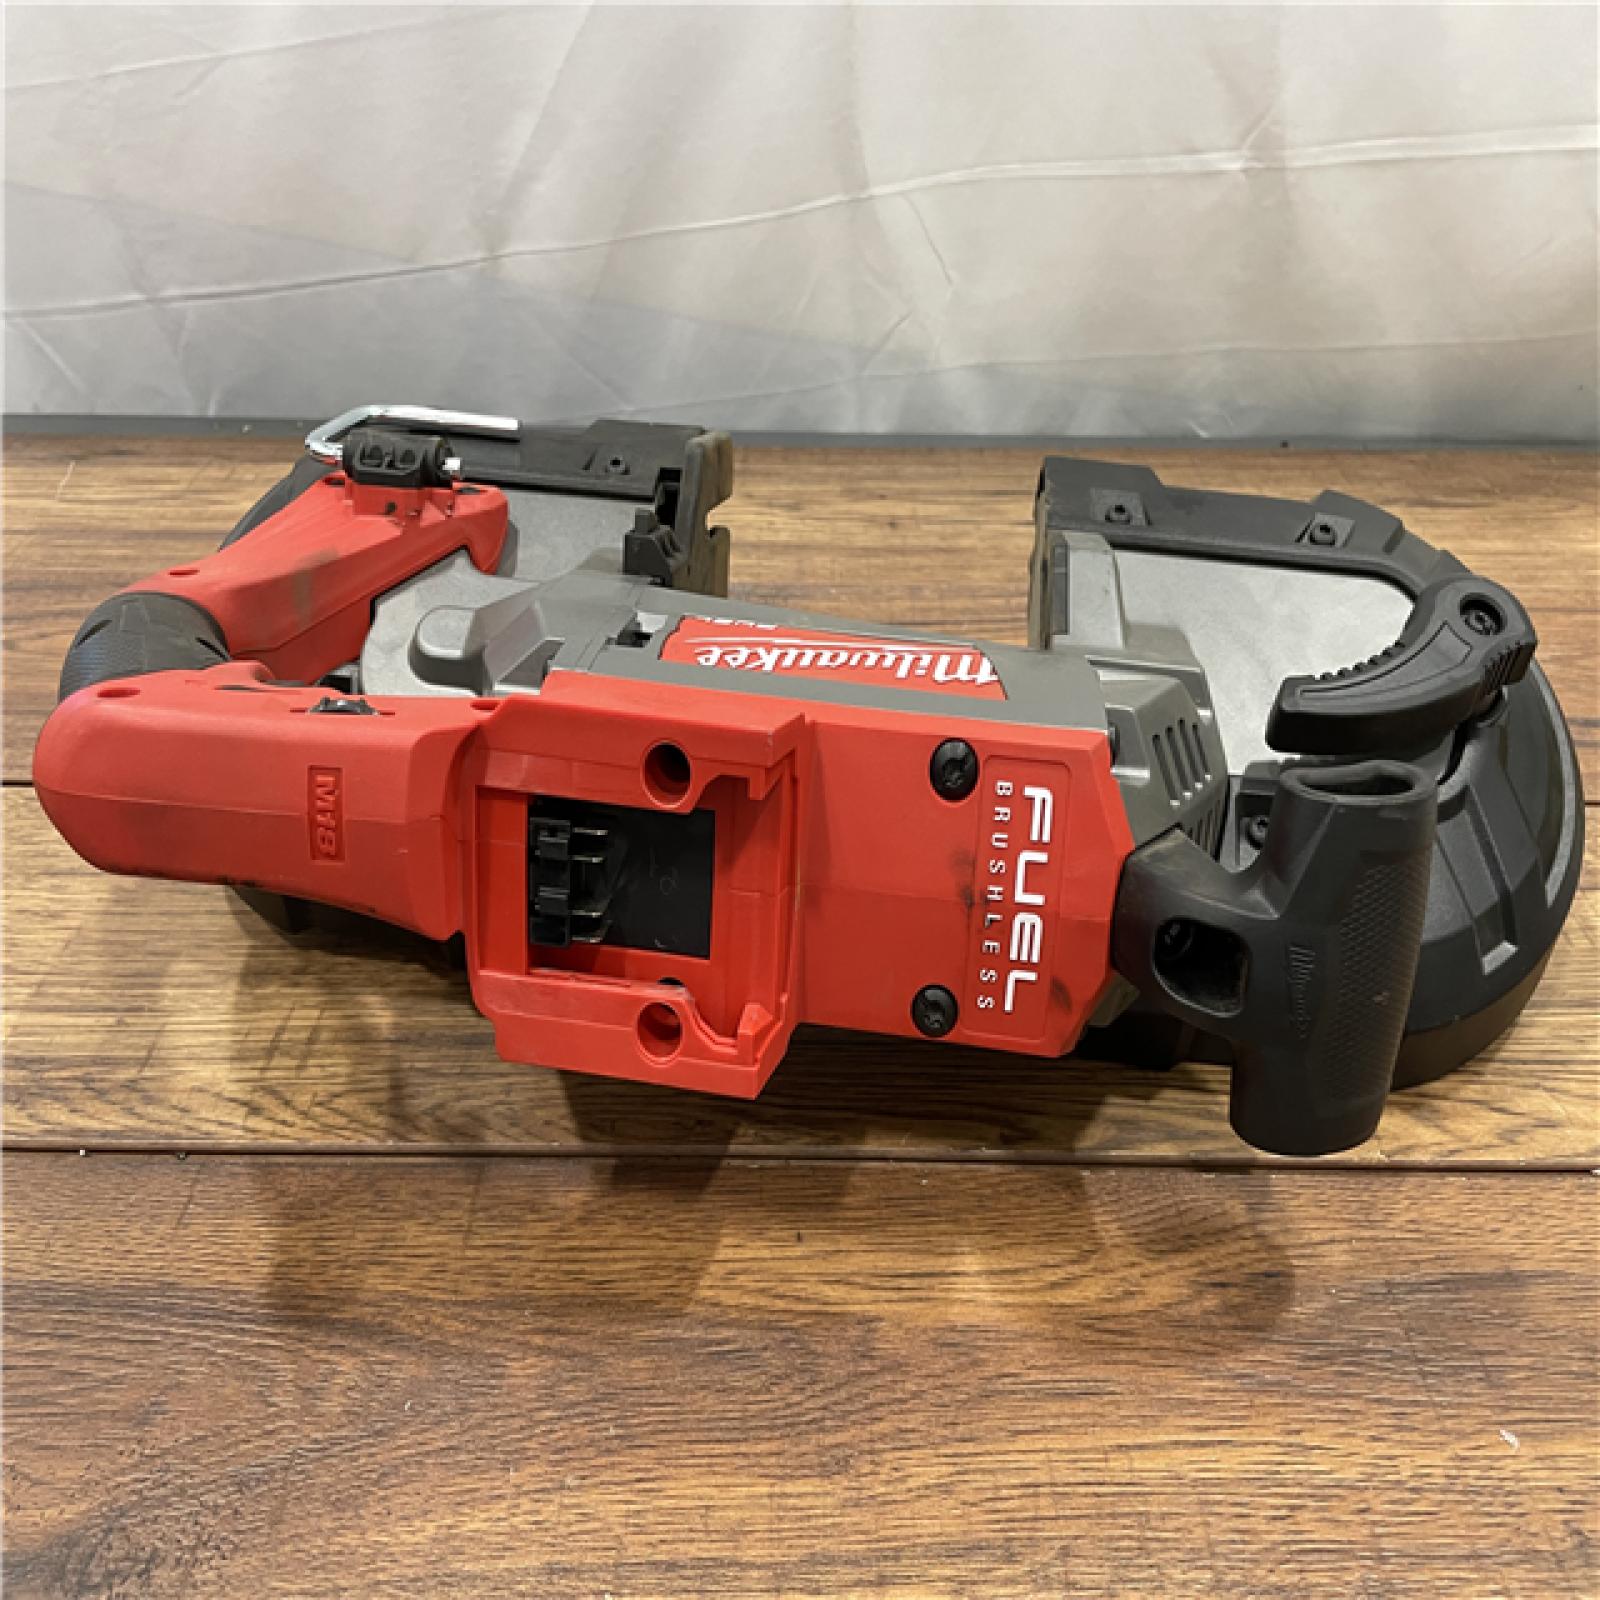 AS-IS Milwaukee M18 FUEL 18V Lithium-Ion Brushless Cordless Deep Cut Band Saw (Tool-Only)